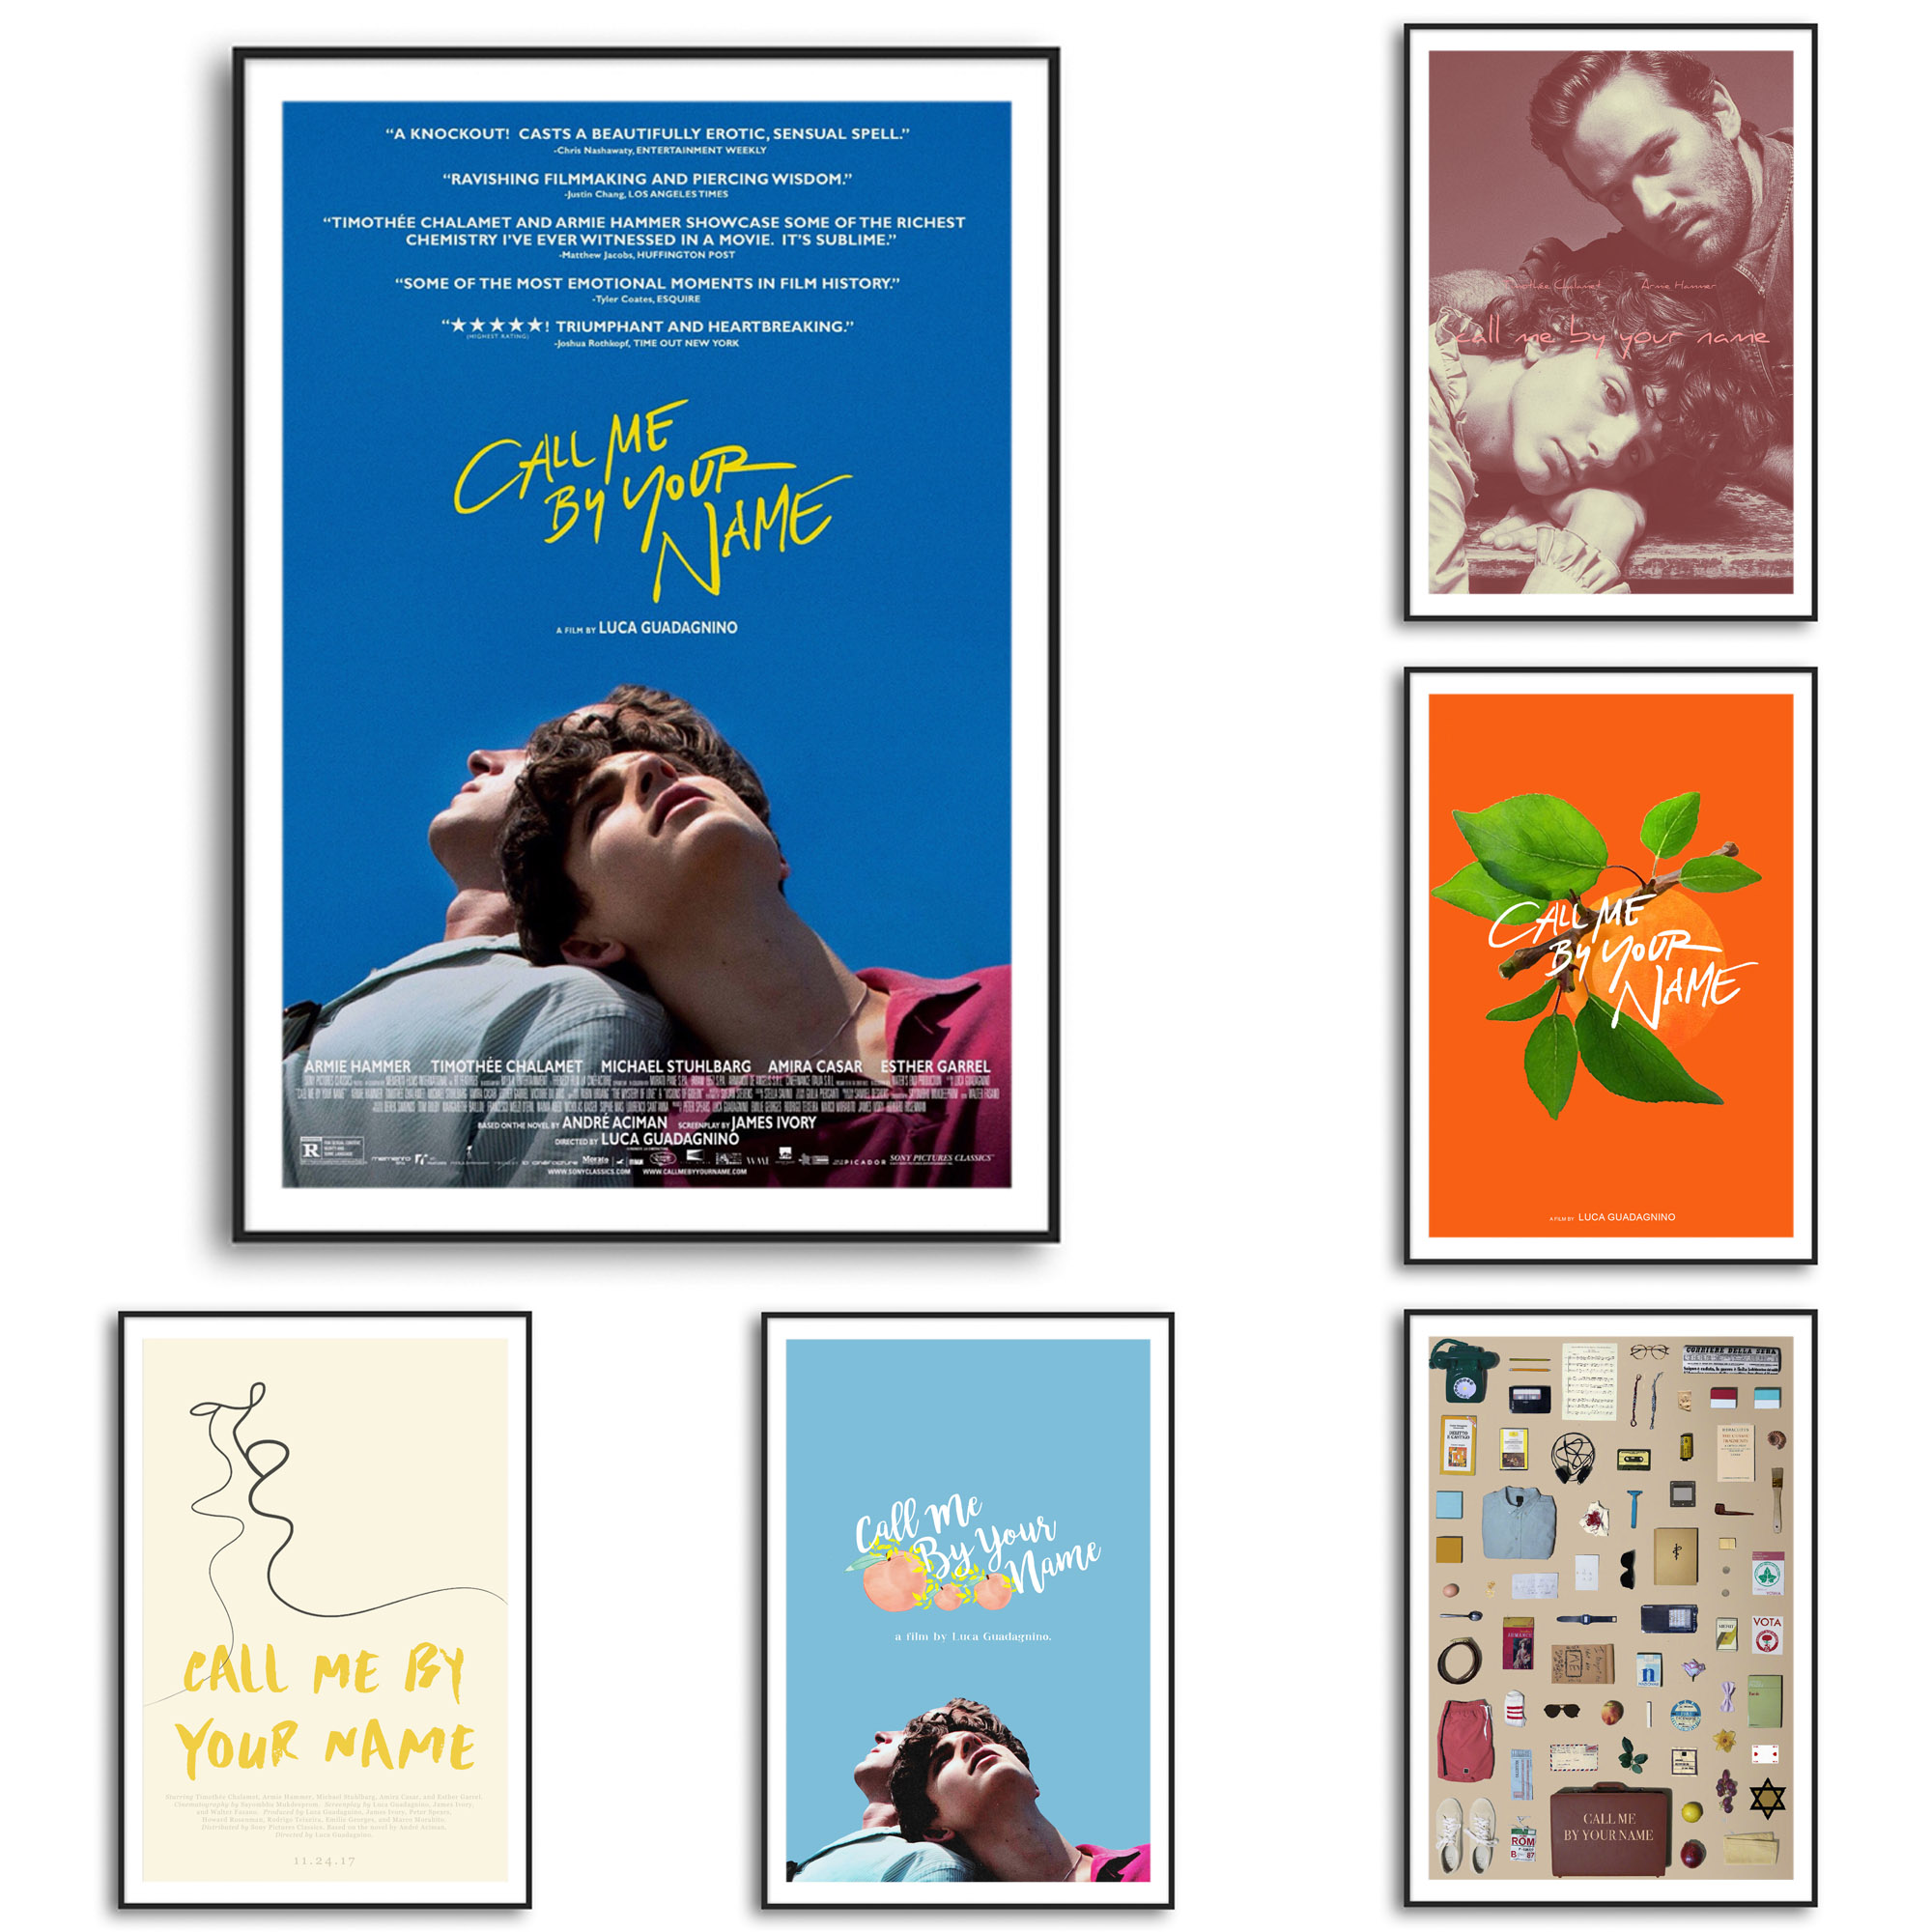 Call Me By Your Name Movie Poster Hd Canvas Print Wall Art Poster Home Decor Wall Decor Decoration Gift No Frame Shopee Philippines